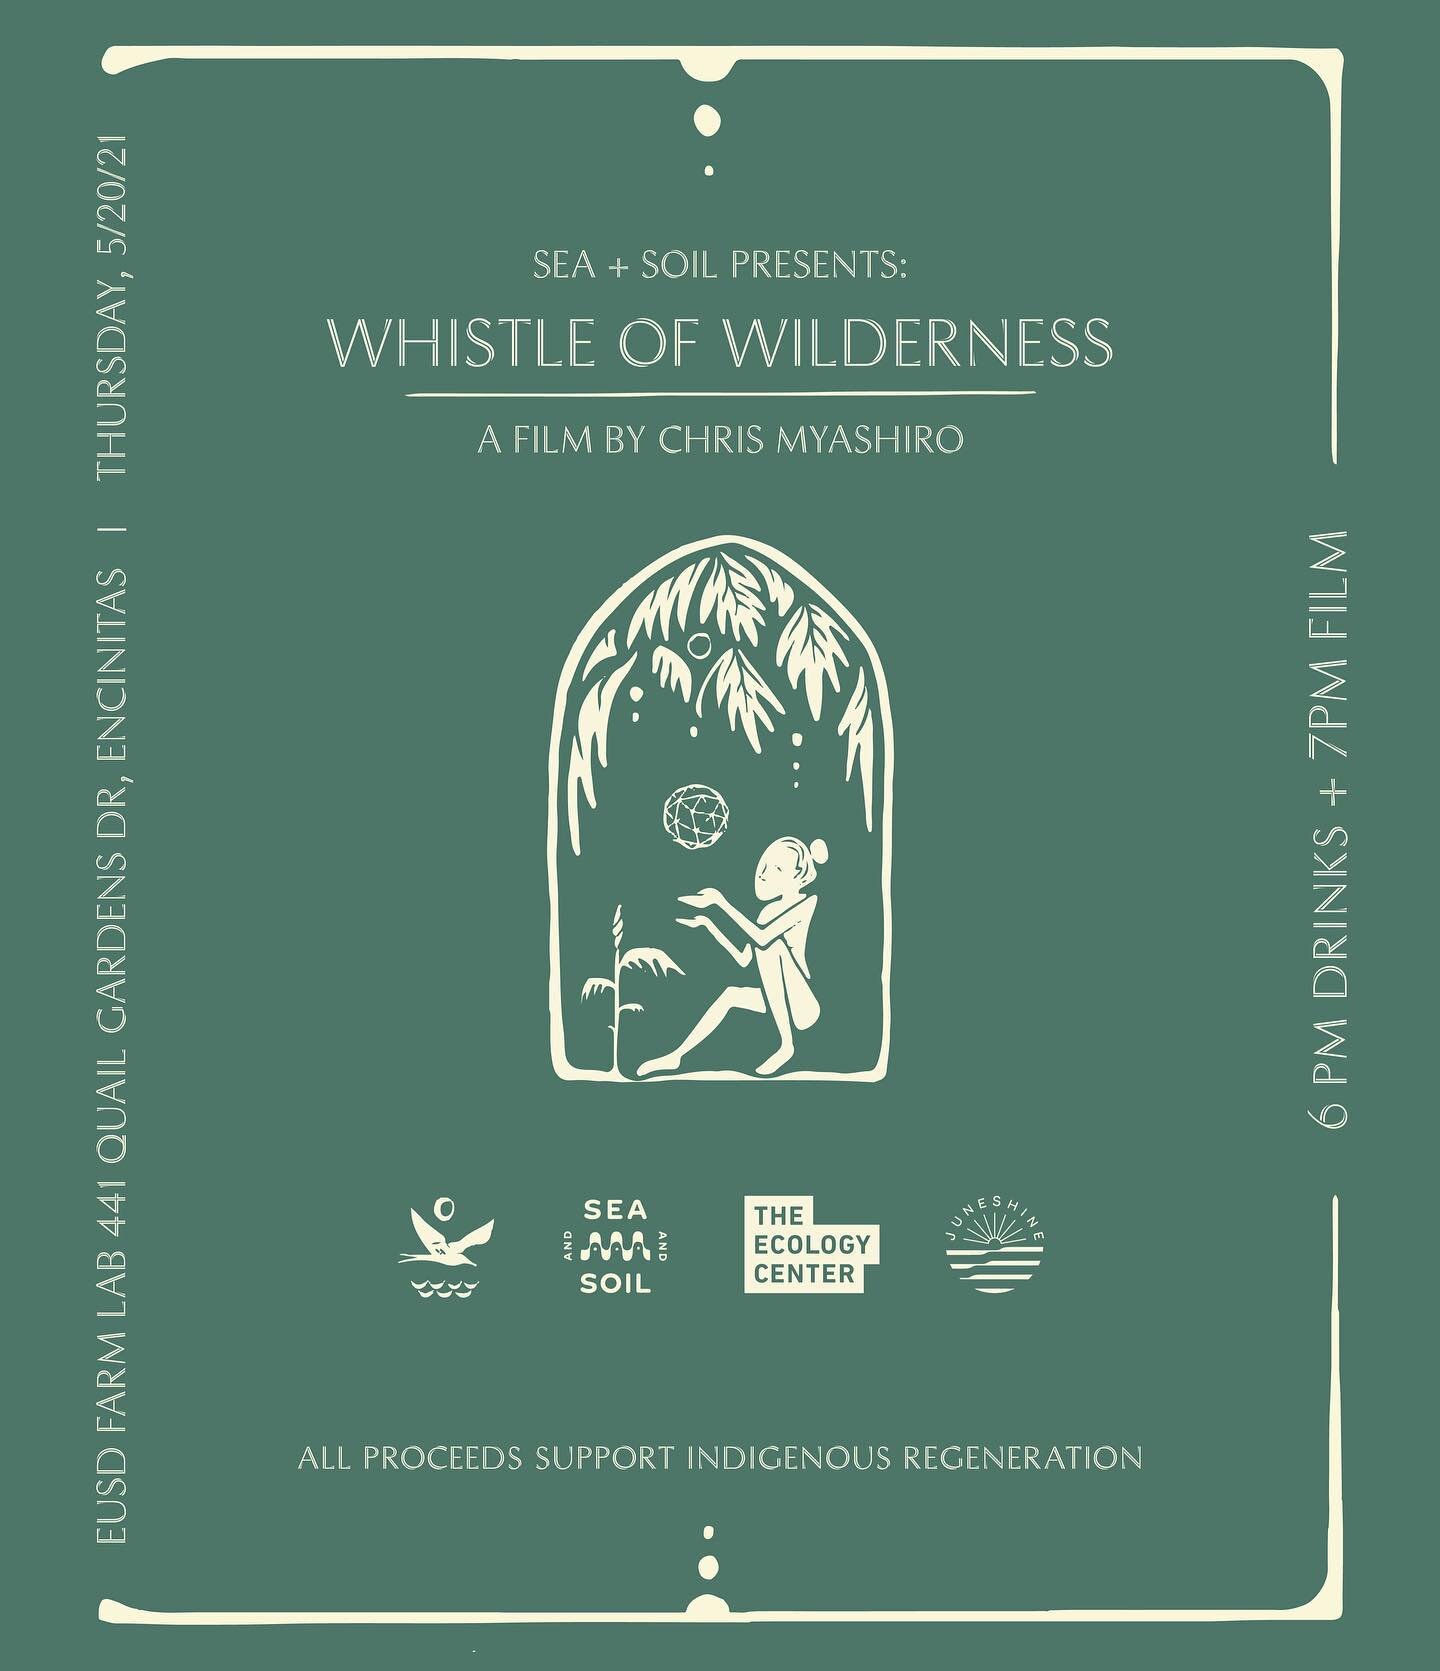 SAVE THE DATE! 👆🏾🌿 Sea + Soil presents a screening under the stars - Whistle of Wilderness, a film by Chris Miyashiro @chrismiyashiro / Thursday, May 20 @theecologycenter EUSD Farm Lab Encinitas / 6-9:30pm / supported by @juneshineco

All an artis